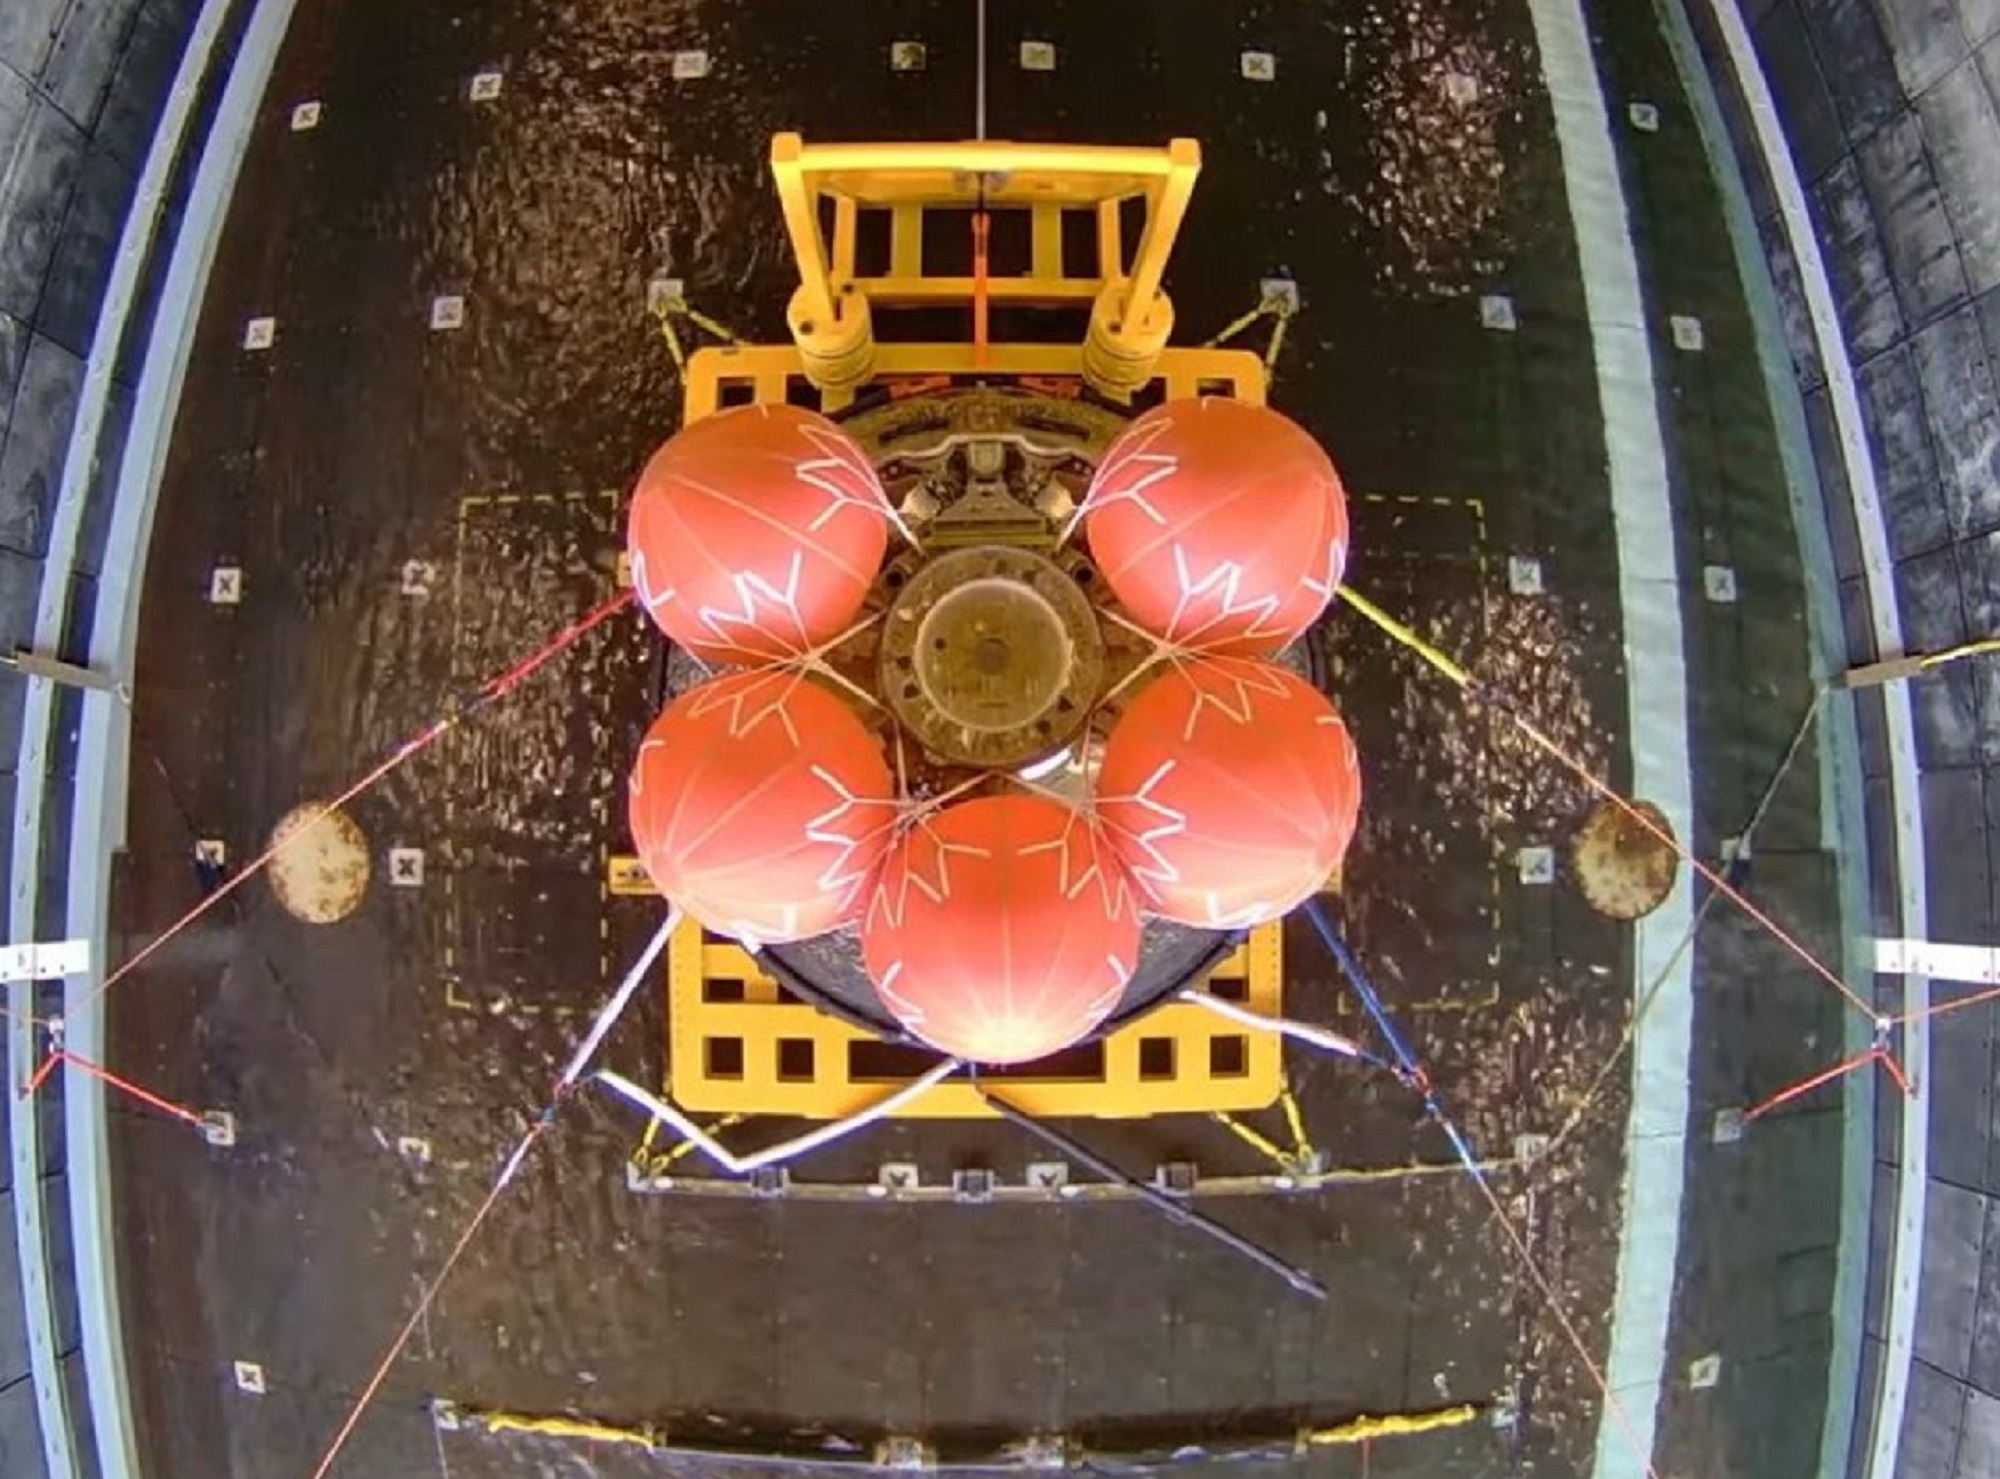 NASA Orion space vehicle on Navy ship with parachutes deployed